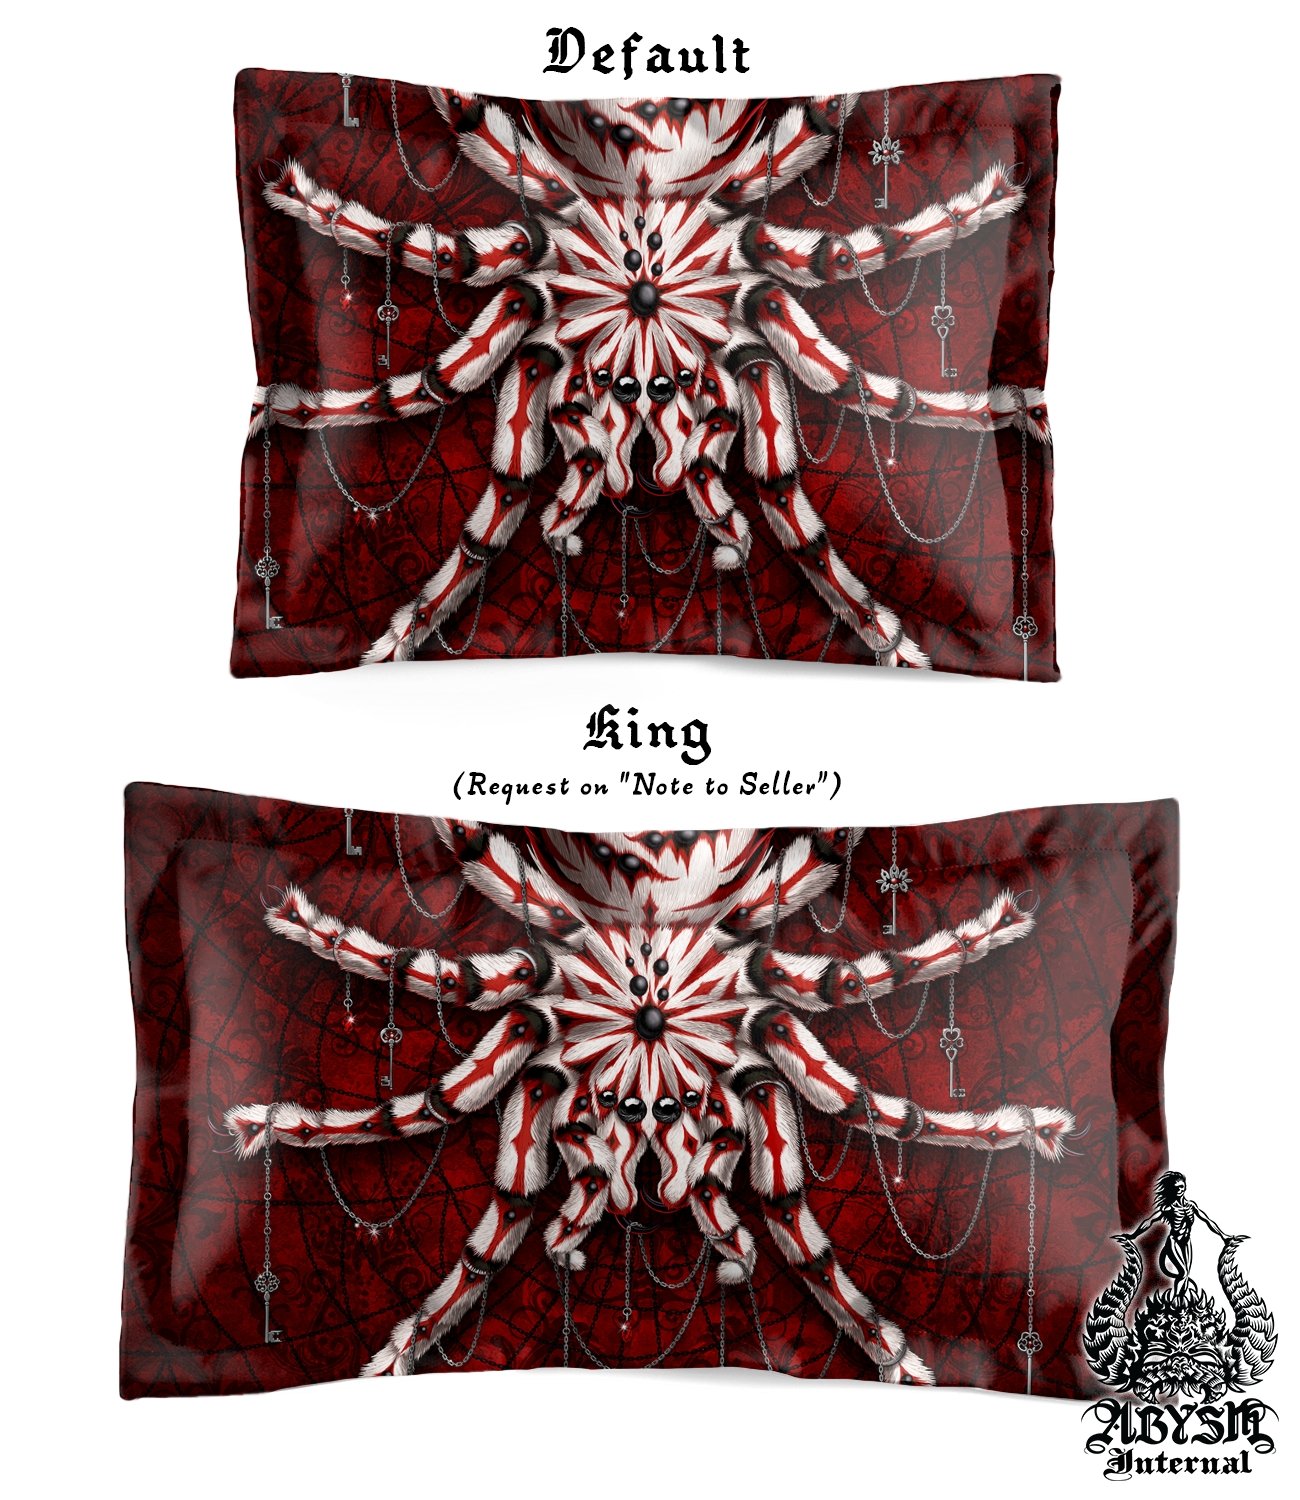 Bloody Spider Bedding Set, Comforter and Duvet, Bed Cover and Bedroom Decor, King, Queen and Twin Size - Tarantula Gothic White - Abysm Internal